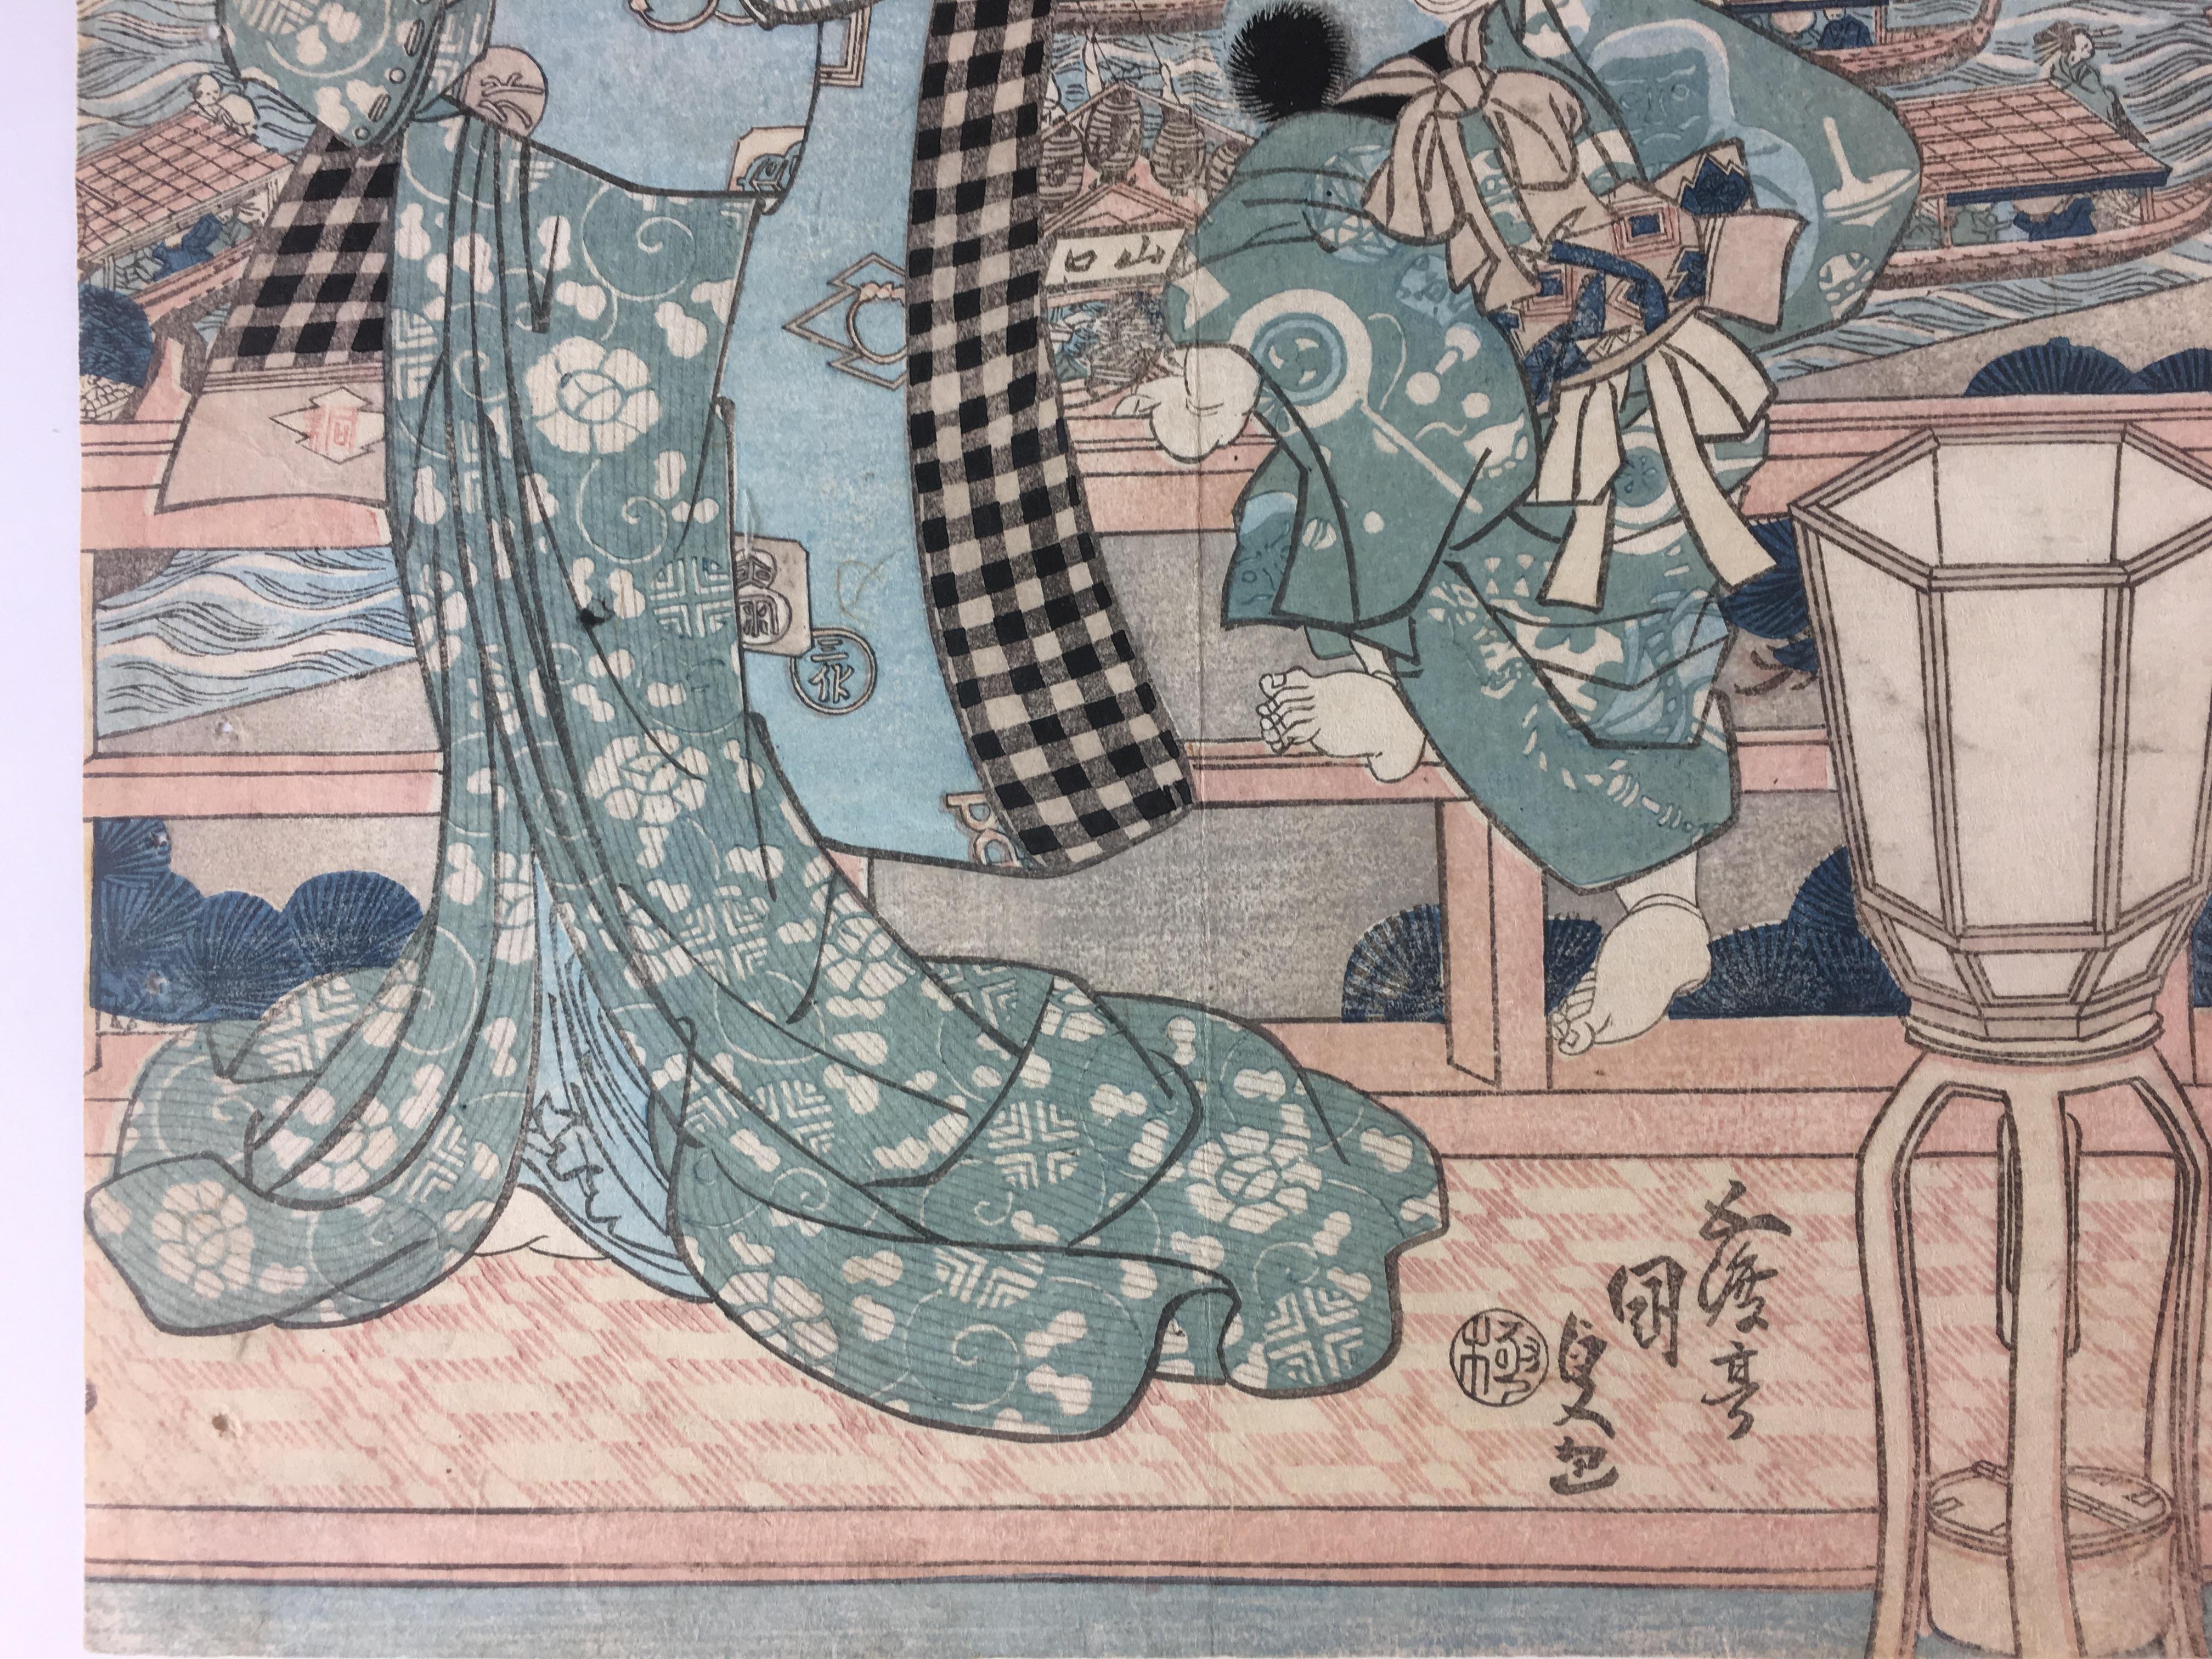 Two beauties enjoying a star studded sky on a bridge Below is what appears to be a boat festival. The woman on the left is being watched by the woman on the right who is presumably her servant. She's holding a fan and is dressed in a lavishly